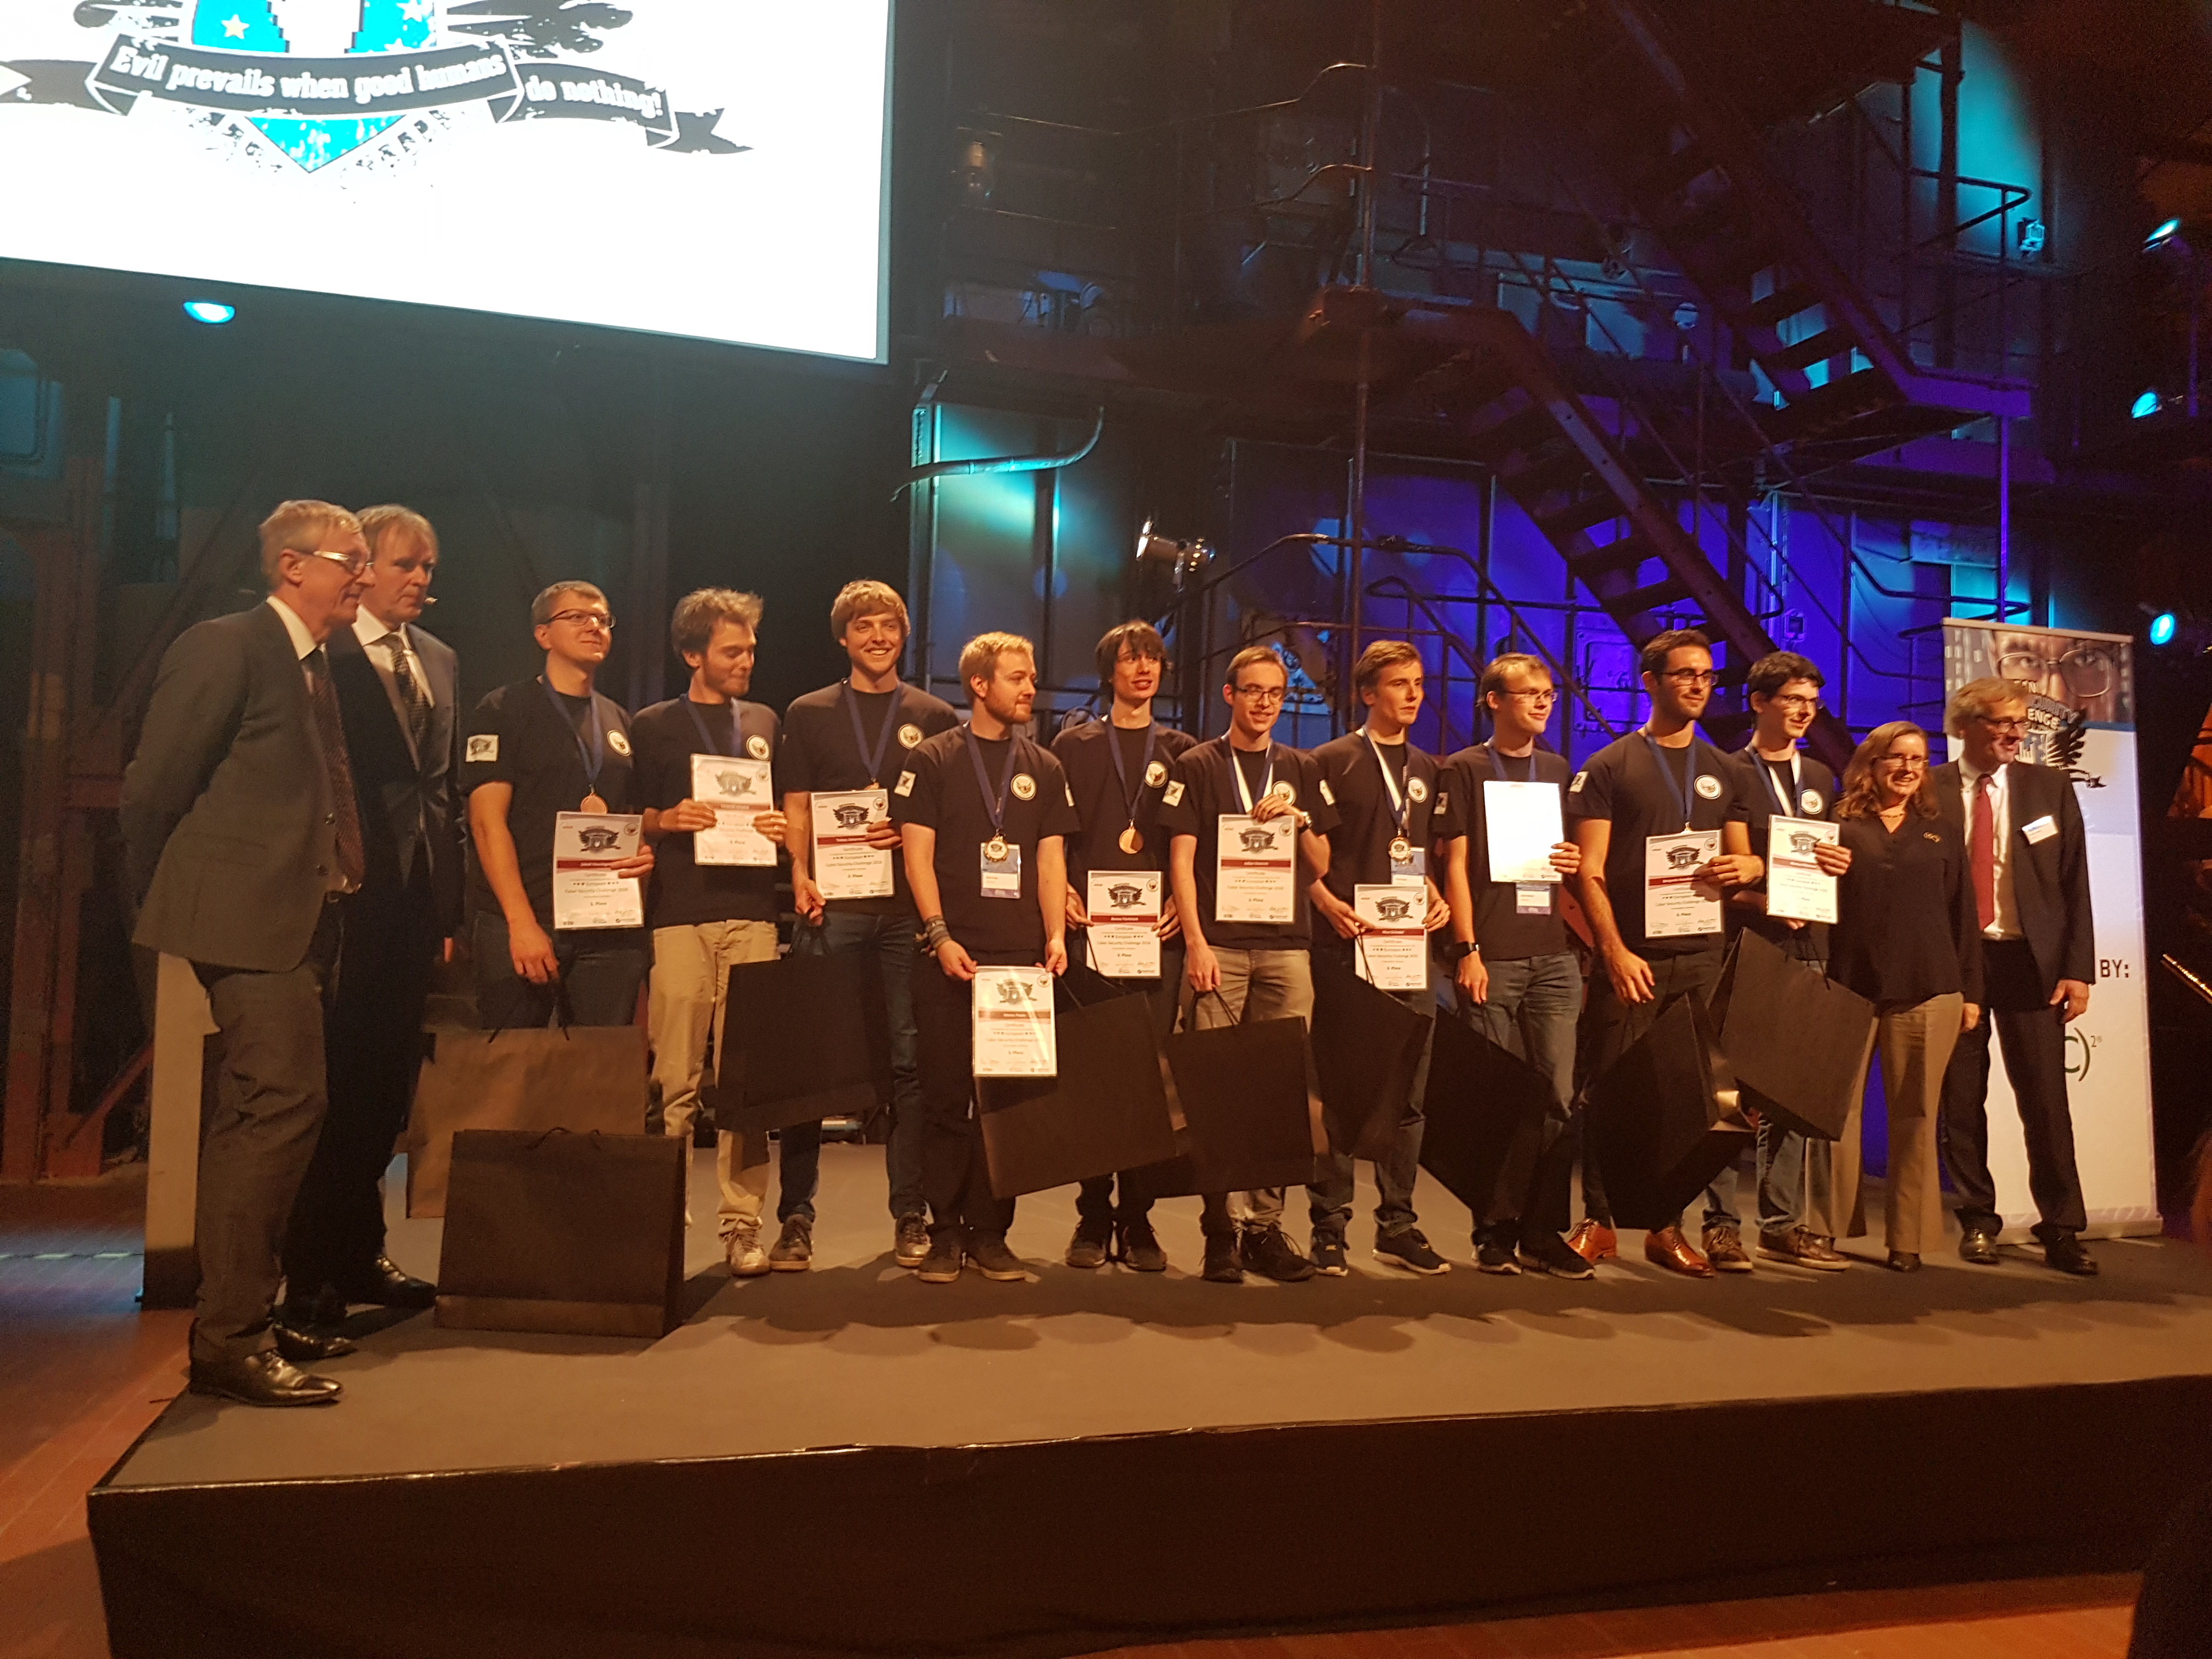 Germany - Third place in the European Cyber Security Challenge competition 2016